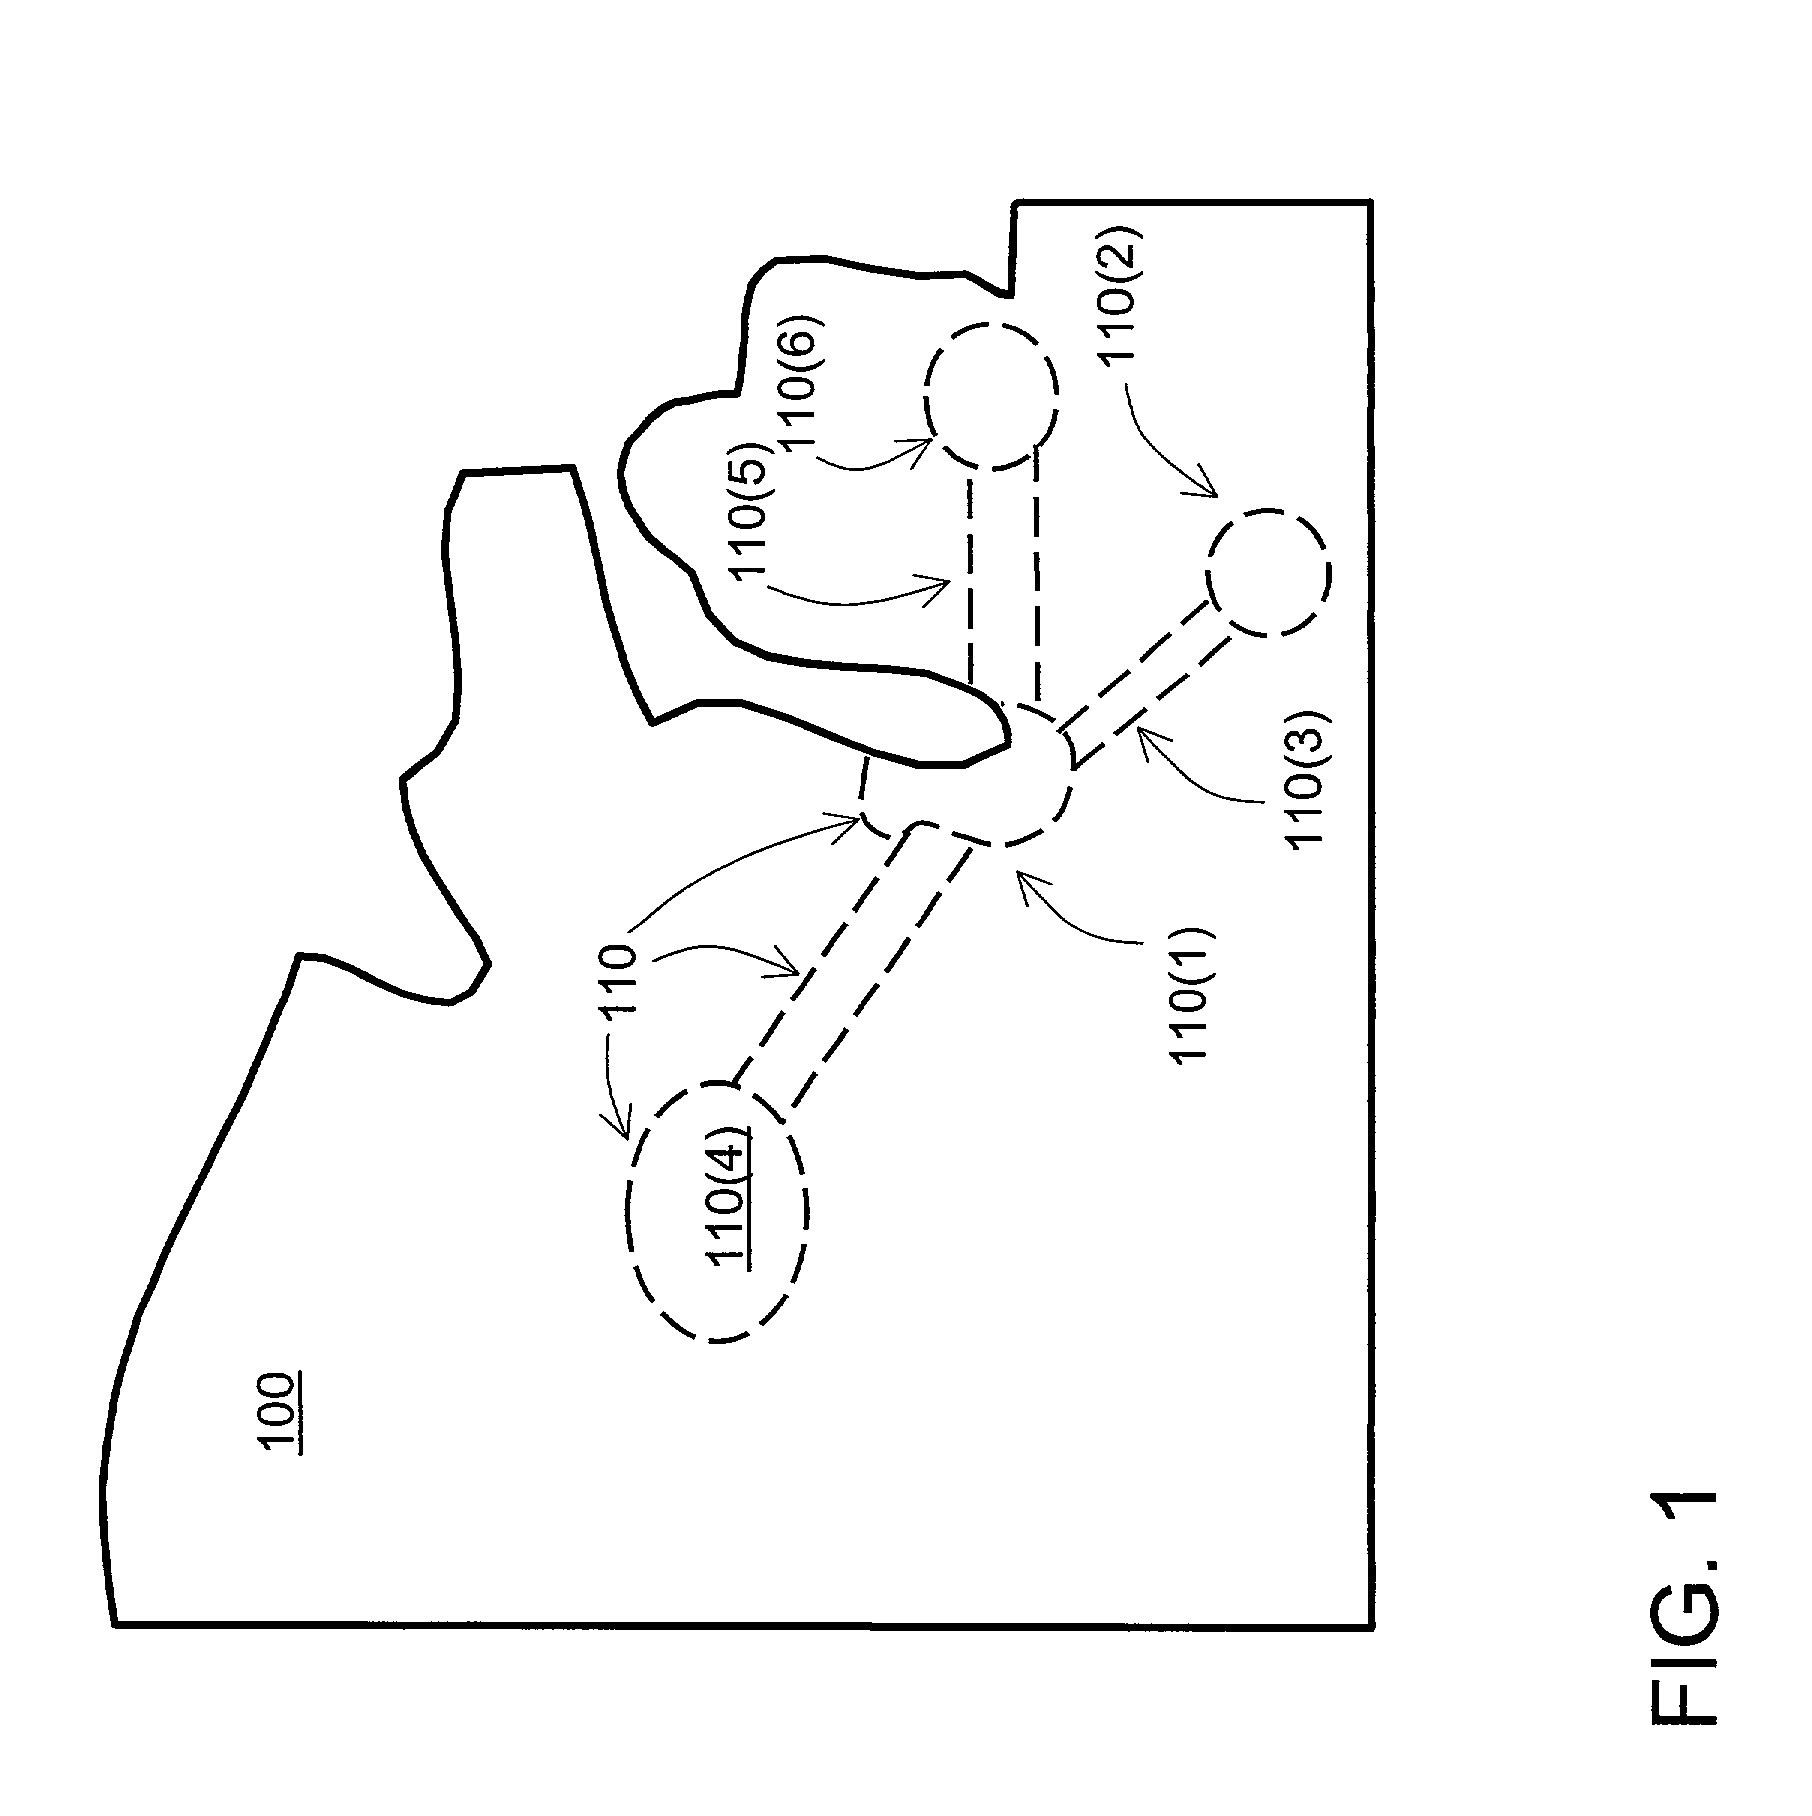 Geographic database including data indicating wireless coverage and method and system for use thereof